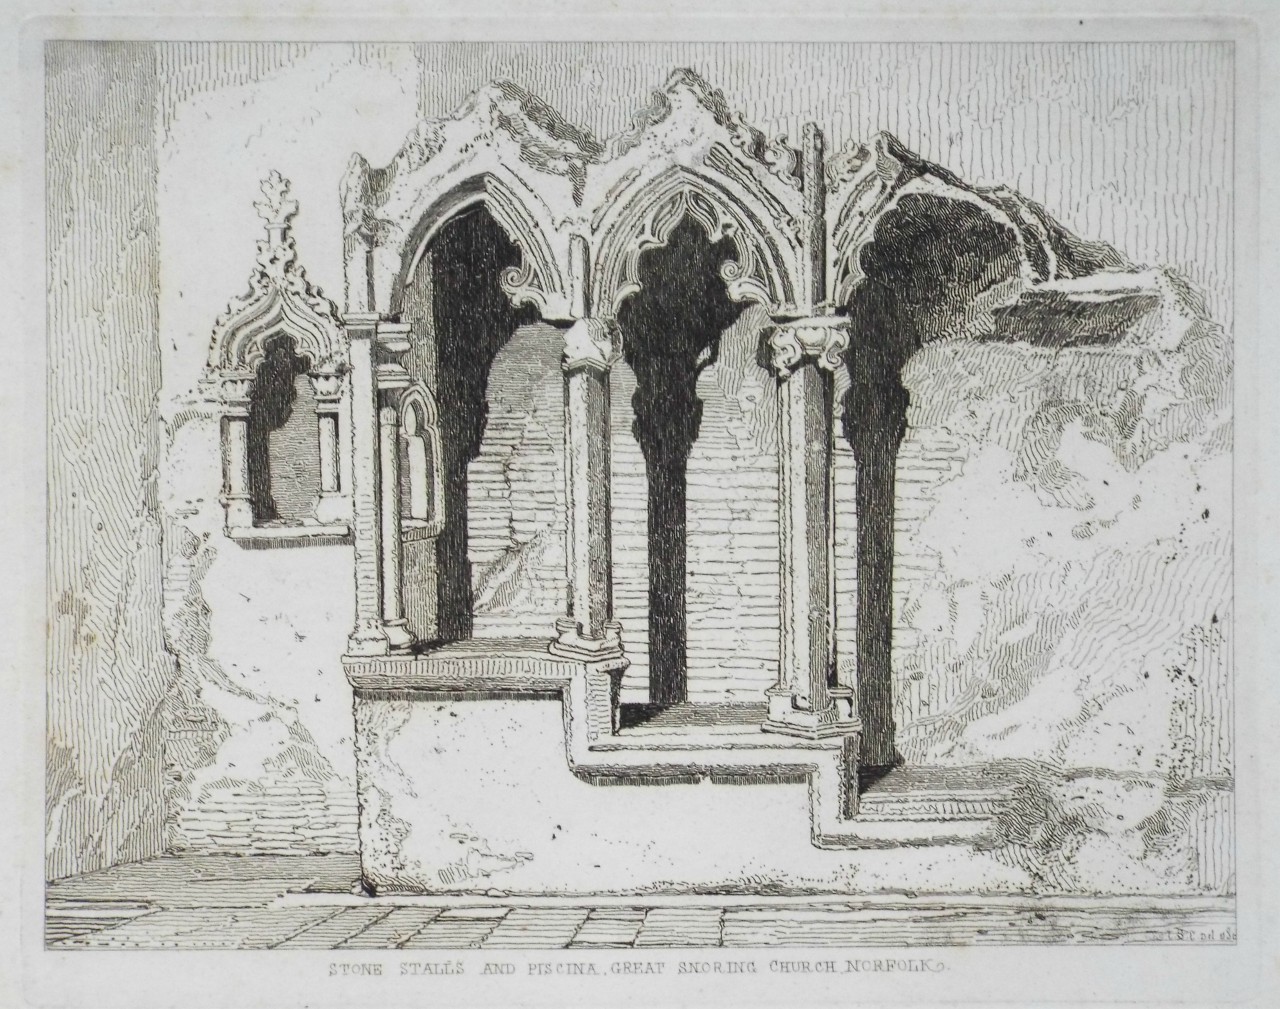 Etching - Stone Stalls and Piscina, Great Snoring Church Norfolk - Cotman